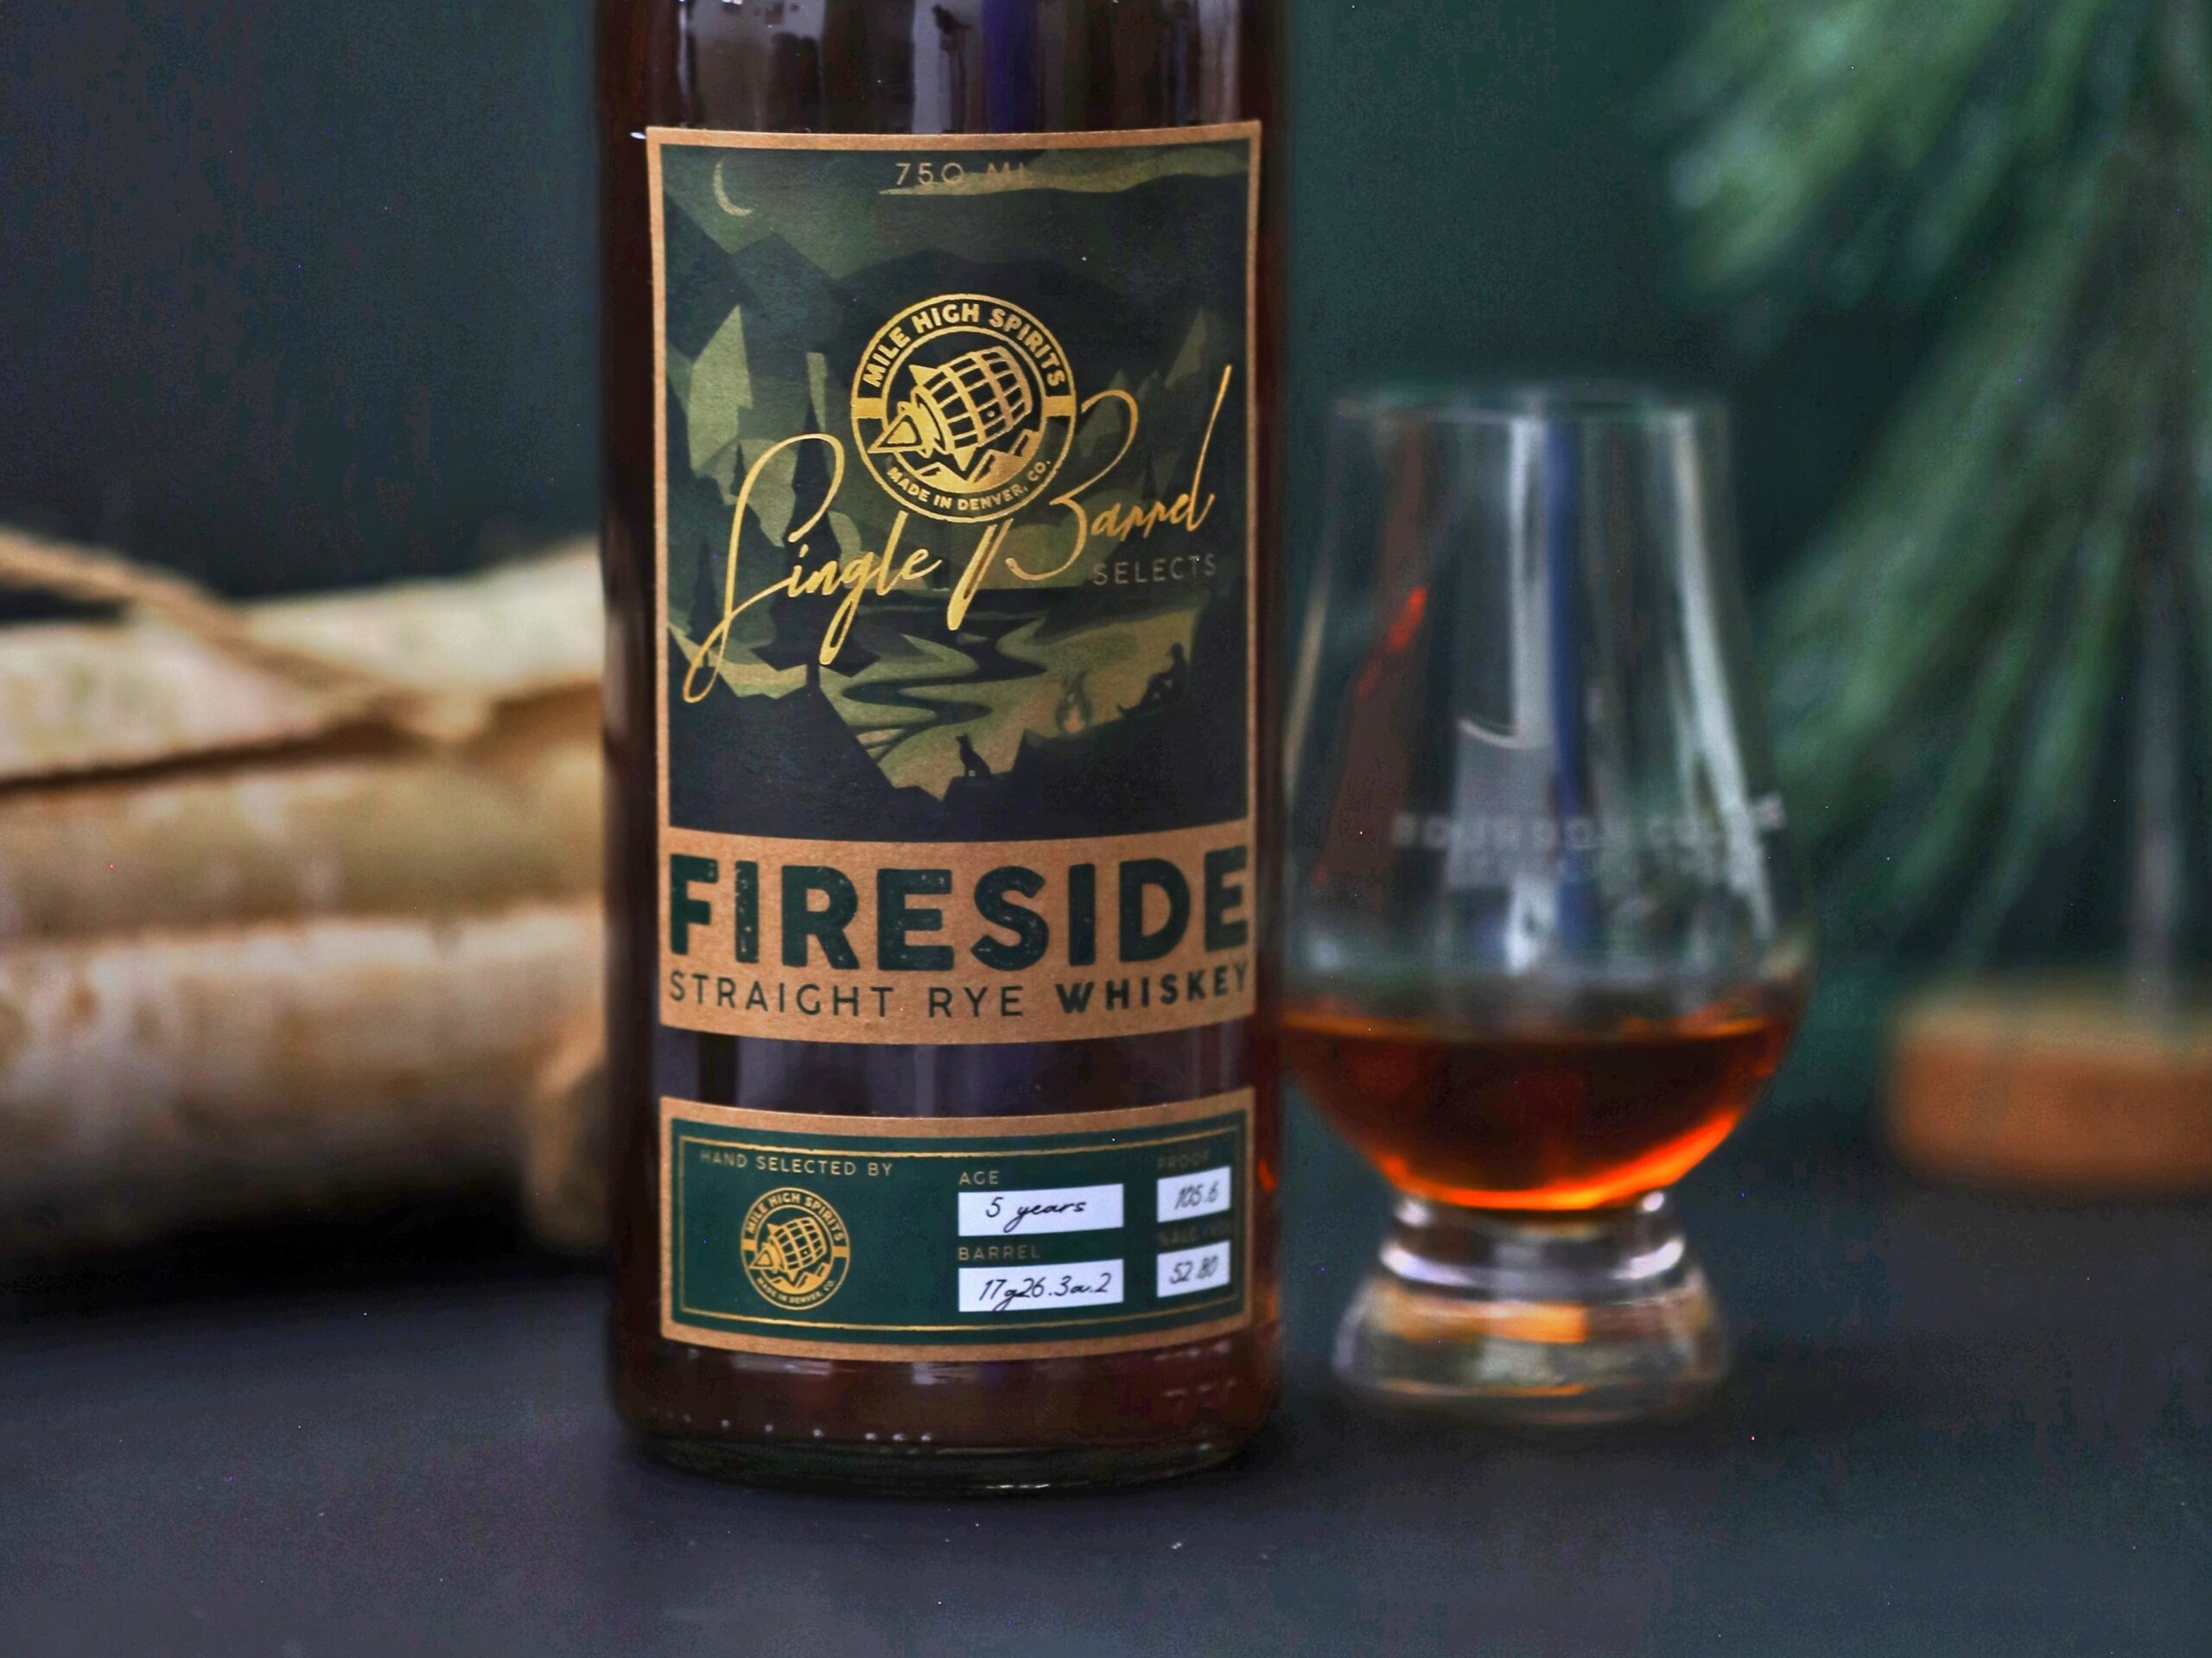 Mile High Spirits Fireside Rye Whiskey Single Barrel (5 Year Old) Review